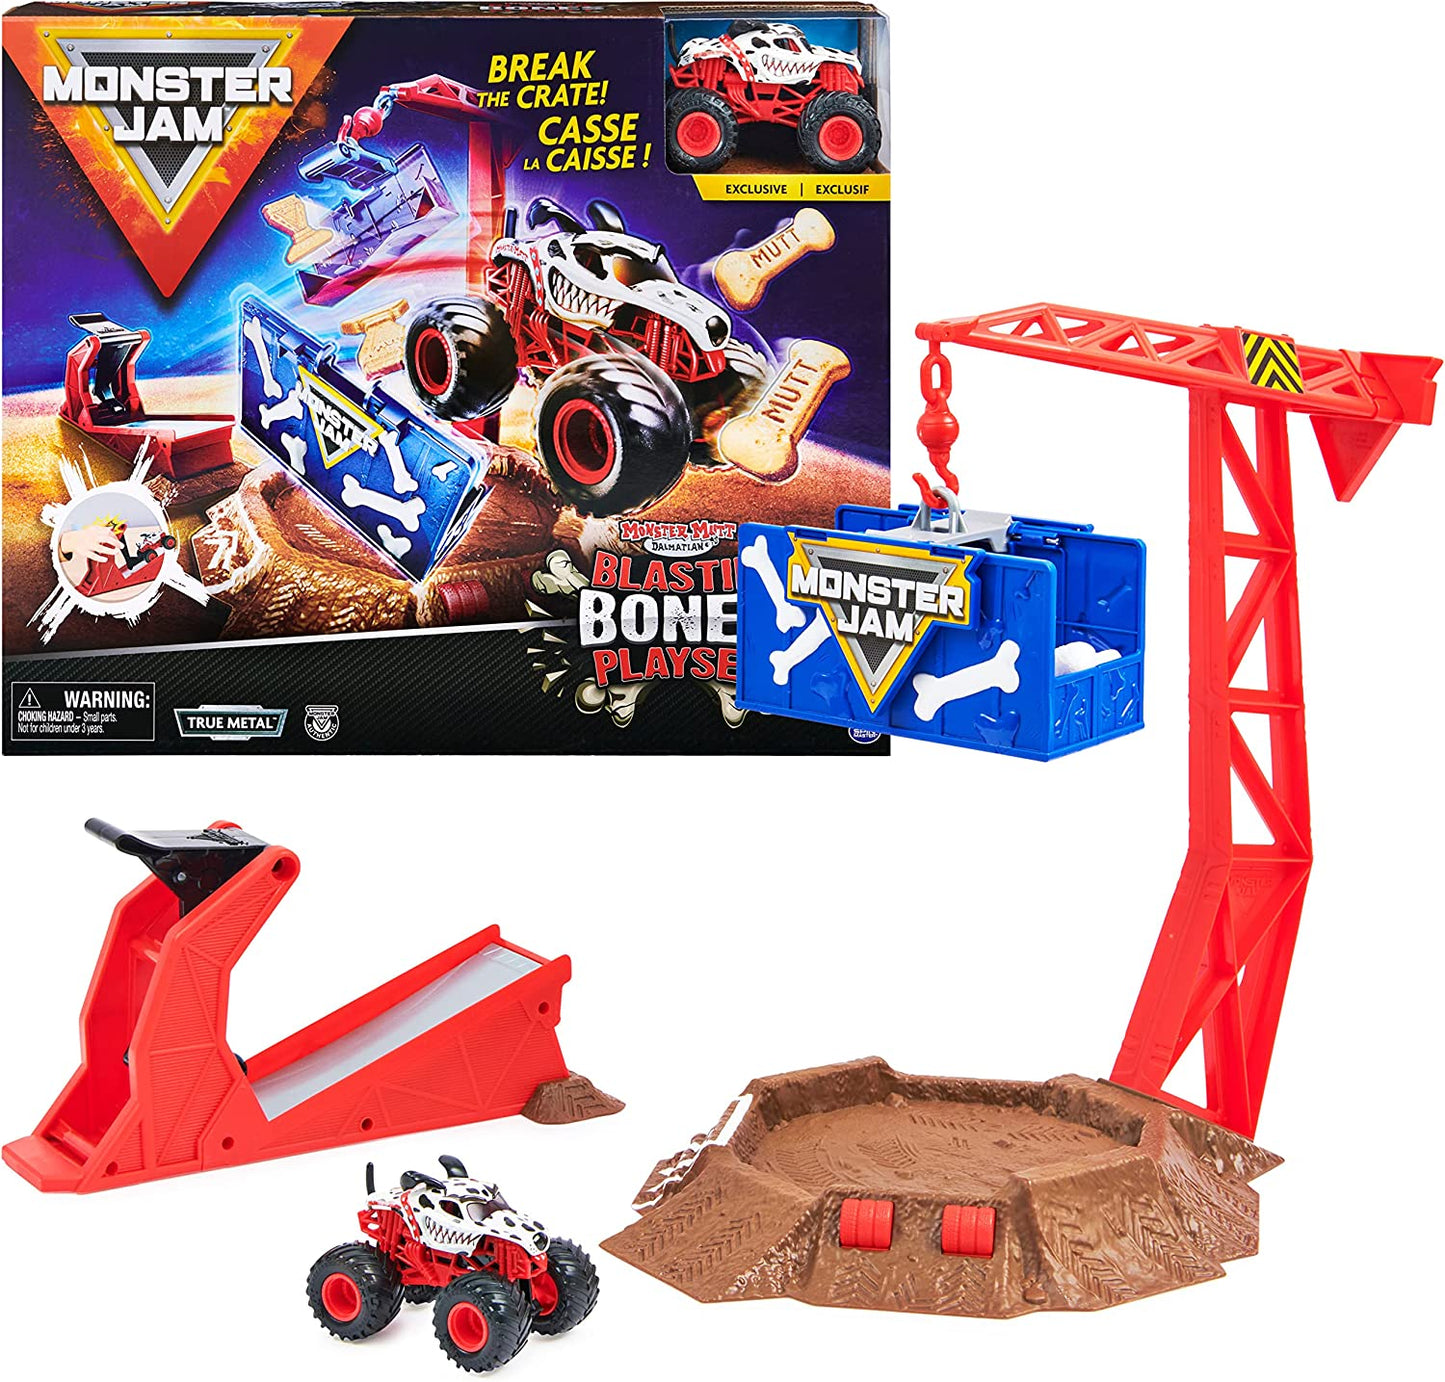 Monster Jam, Blastin’ Bones Playset with Exclusive Monster Mutt Dalmatian, Monster Truck Kids Toys for Boys Aged 3 and Up